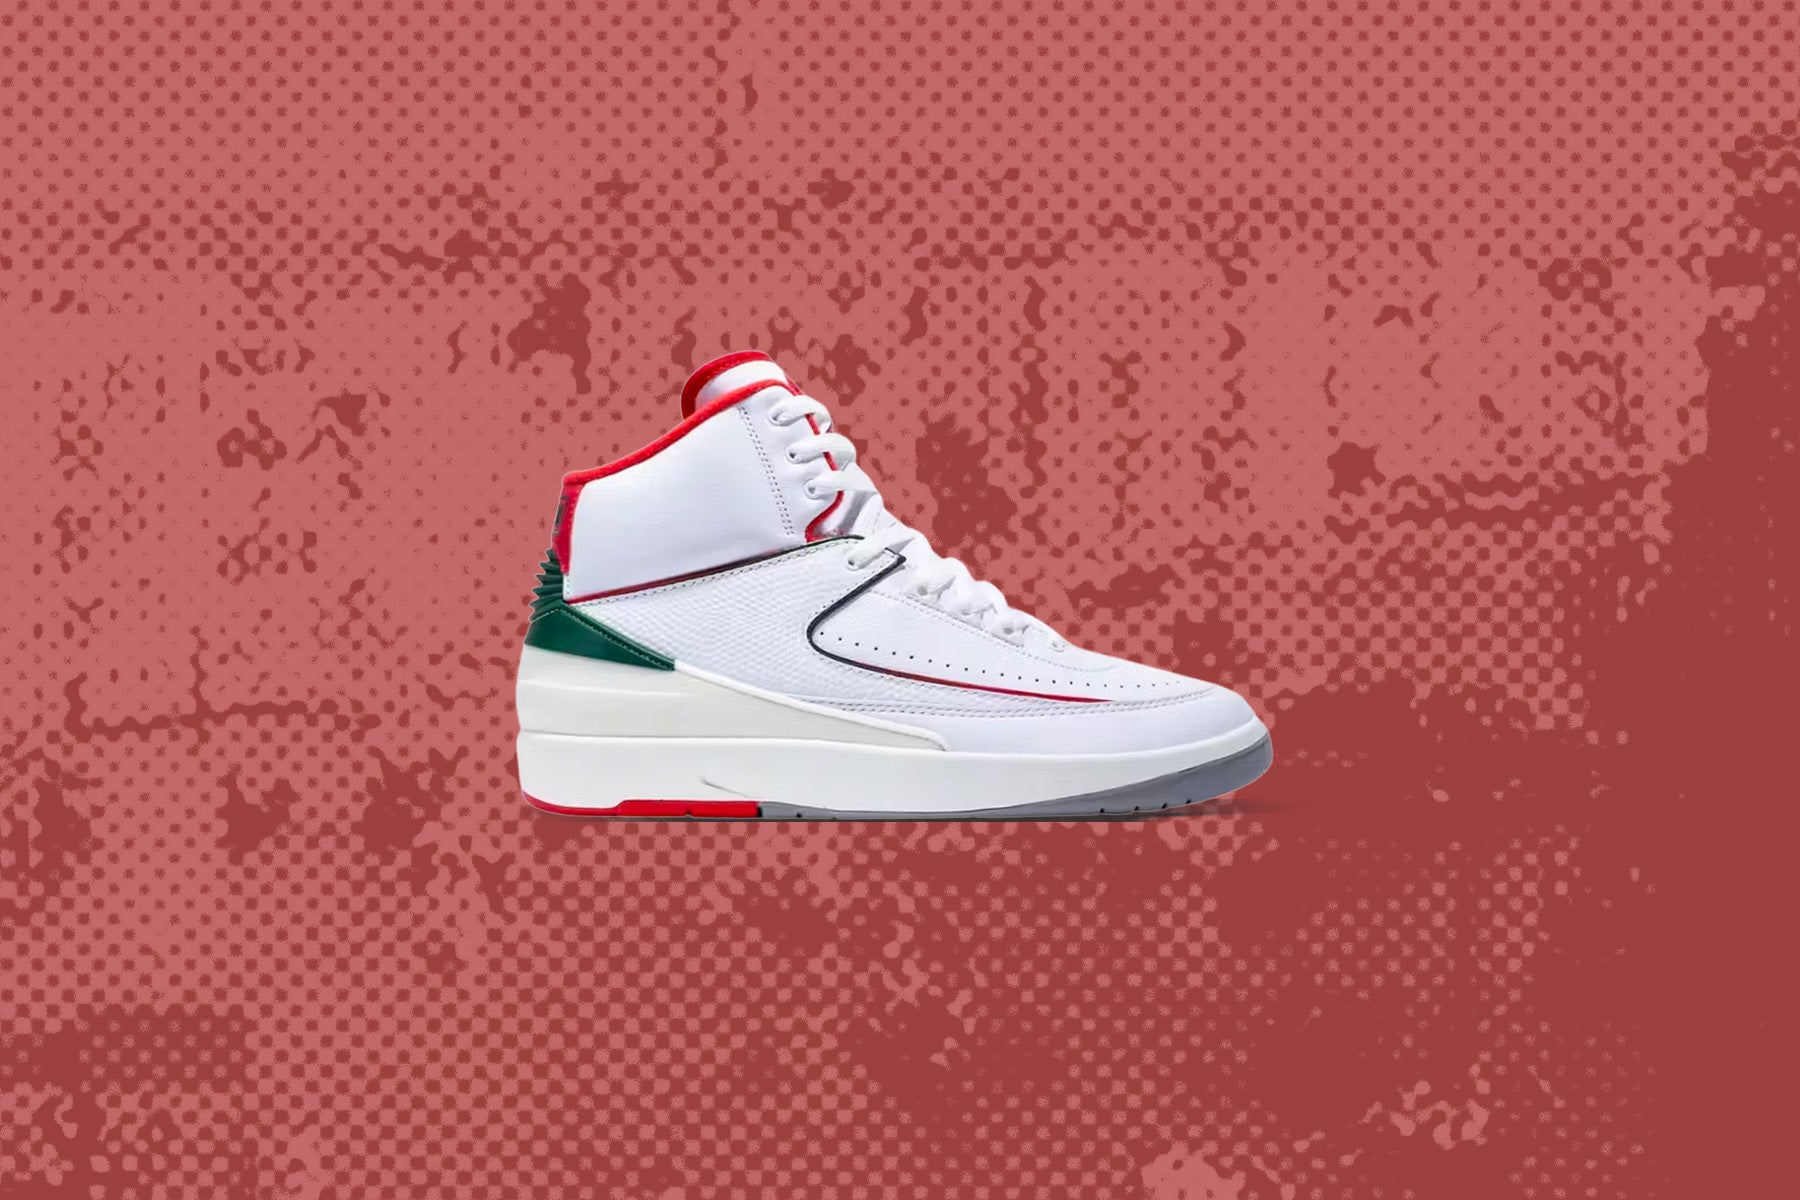 Air Jordan 2 Retro (GS) 'Italy' - White/Fire Red/Fir, , large image number null